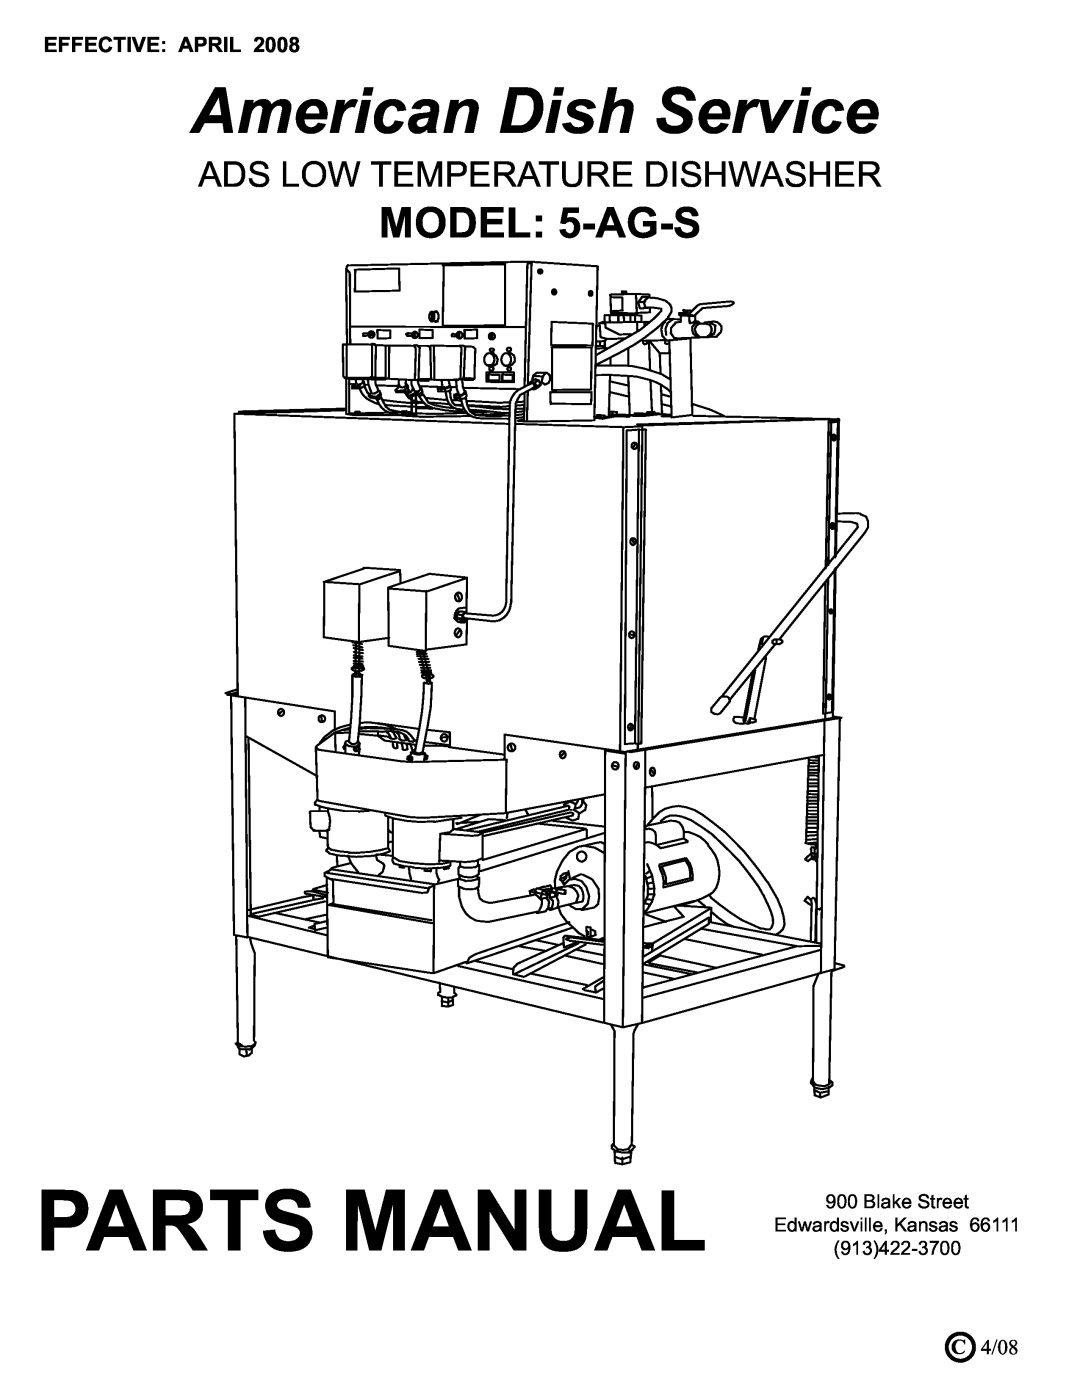 American Dish Service manual Ads Low Temperature Dishwasher, Parts Manual, American Dish Service, MODEL 5-AG-S, C4/08 